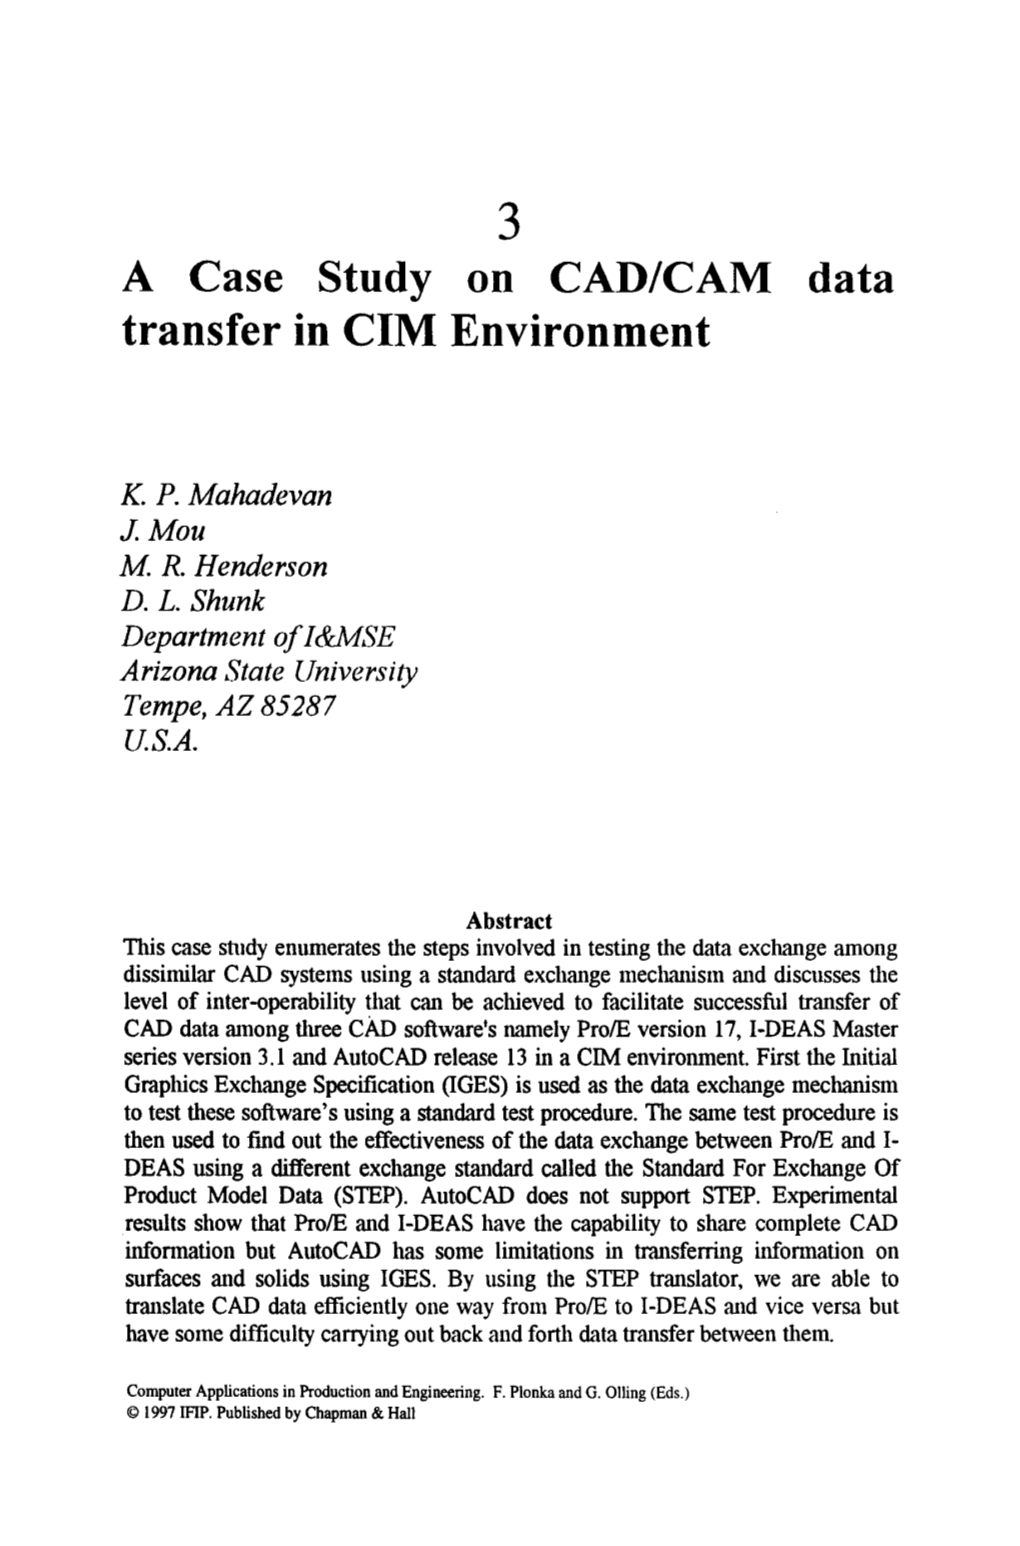 A Case Study on CAD/CAM Data Transfer in CIM Environment